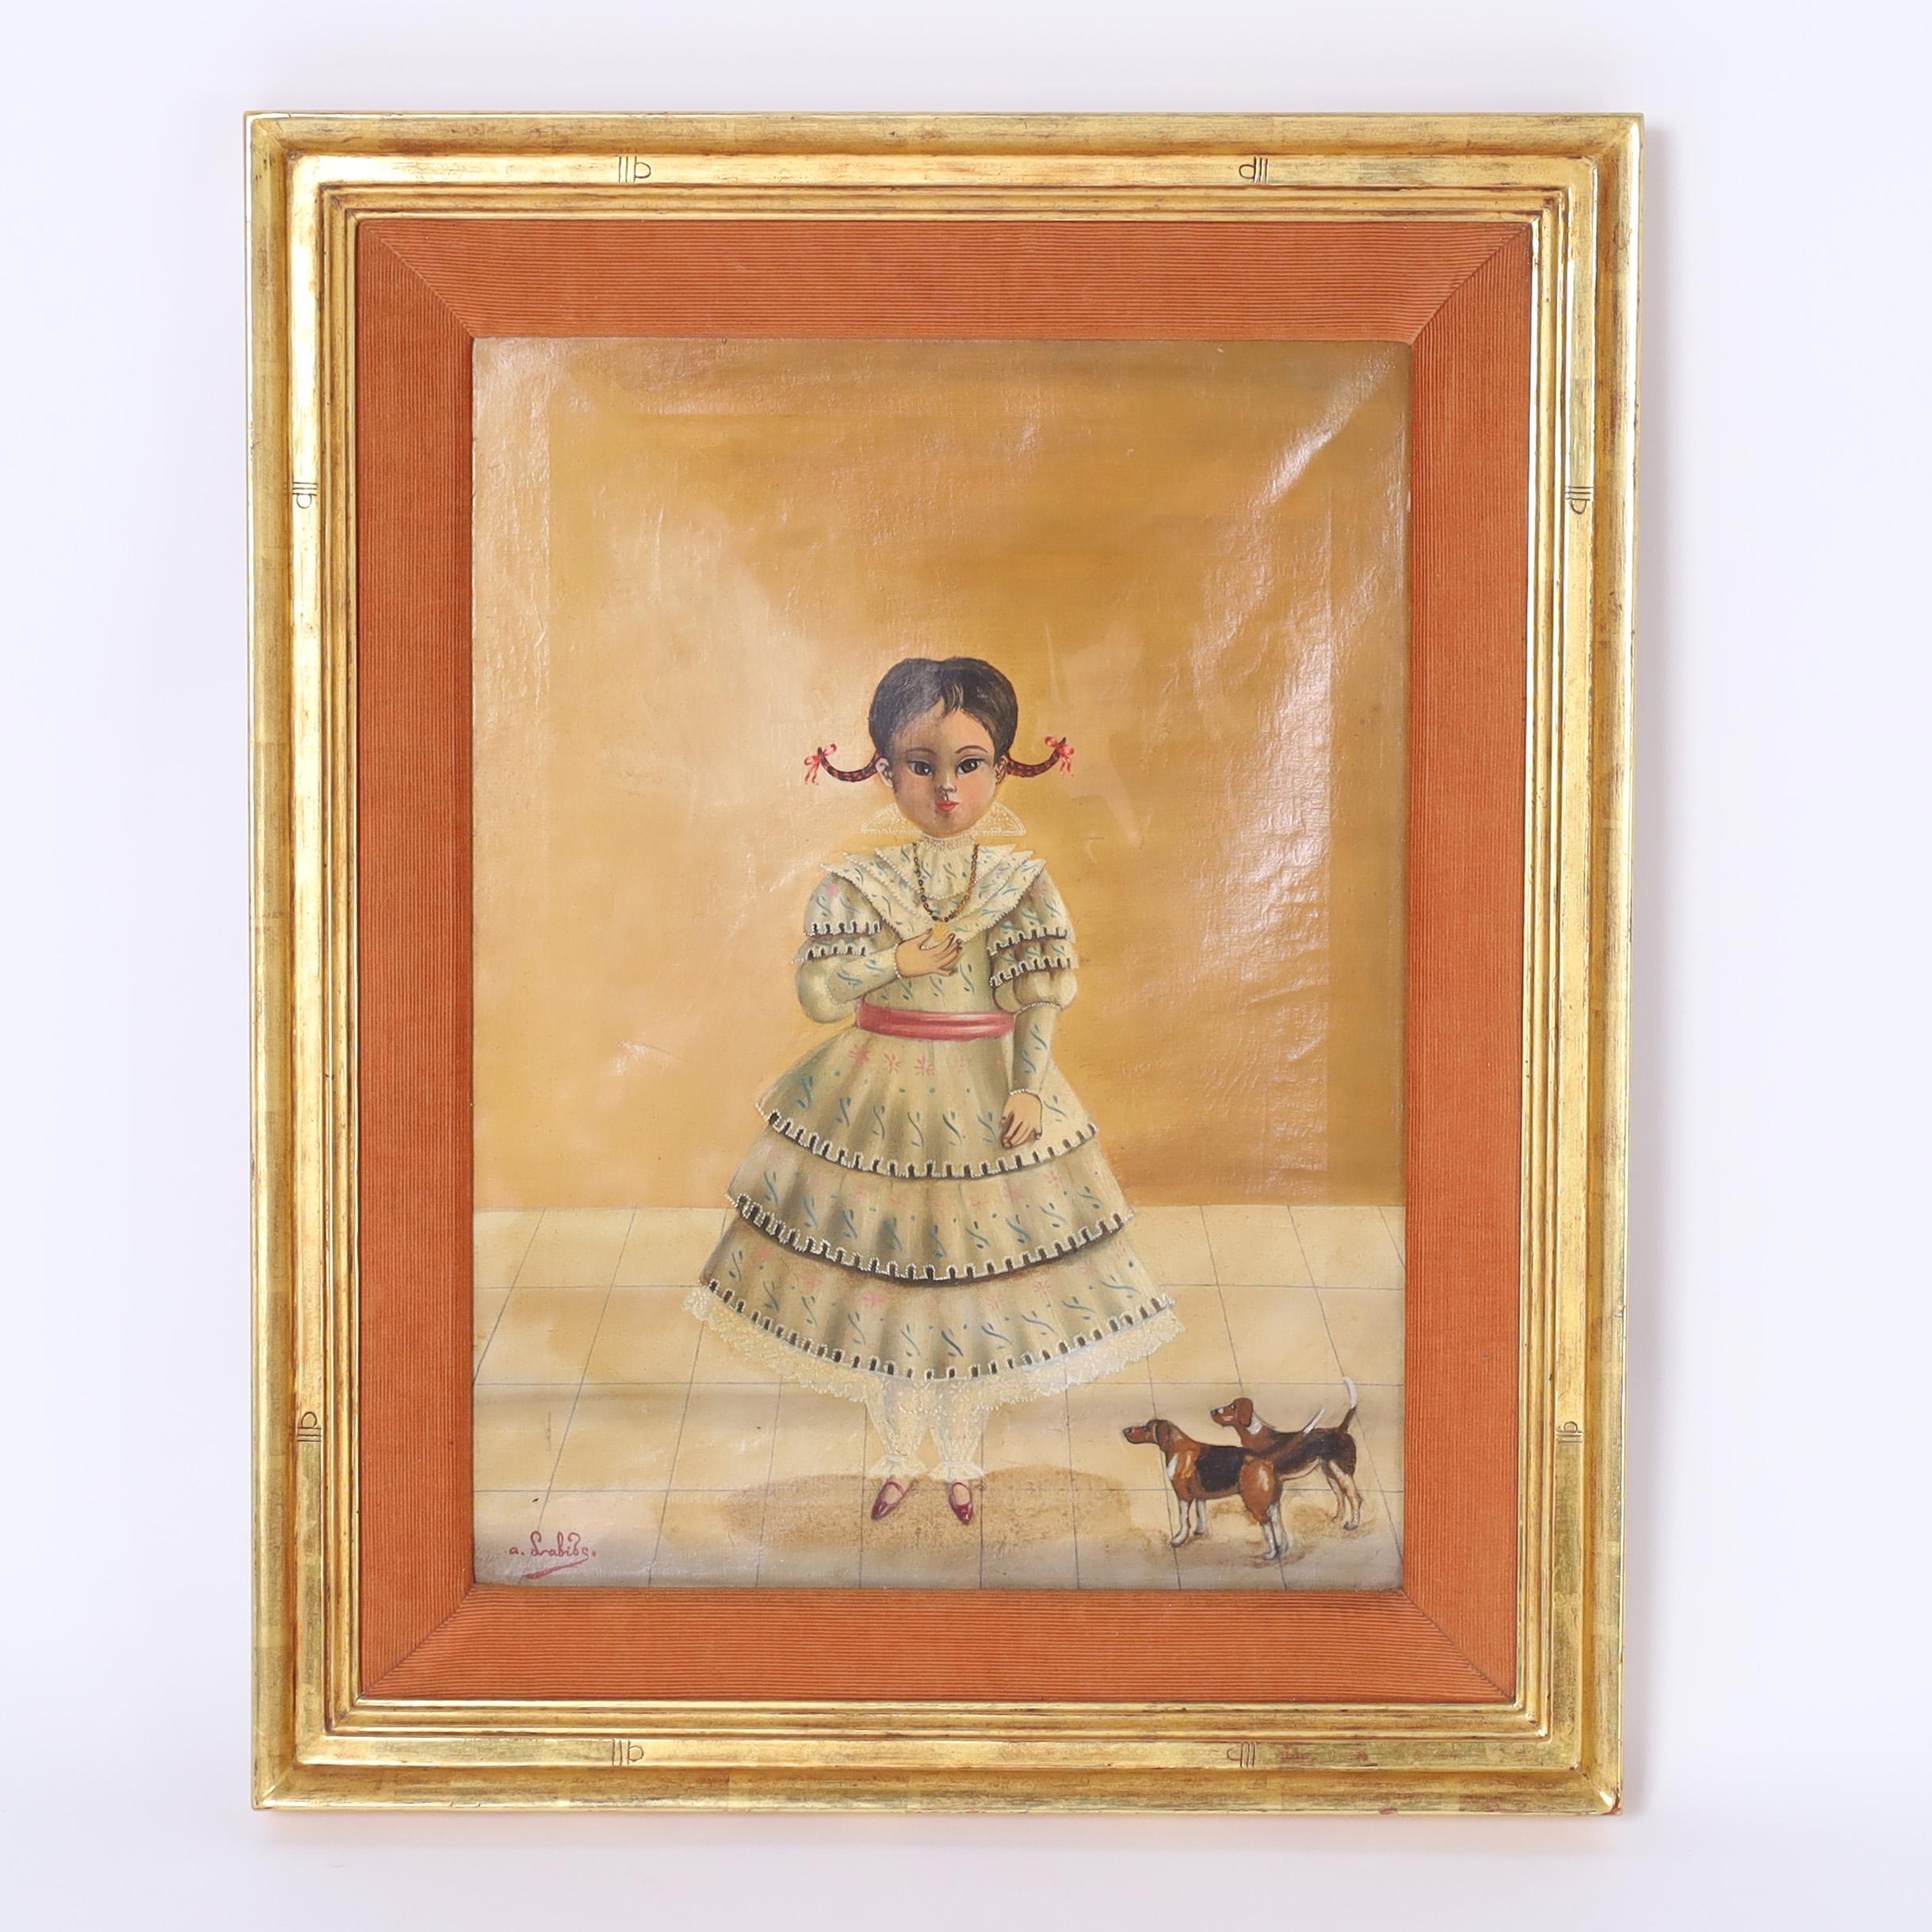 Charming Folk Art painting of a young girl in a dress with two dogs executed in a distinctive naive style by noted Mexican artist Agipito Labios and presented in a gilt wood frame.